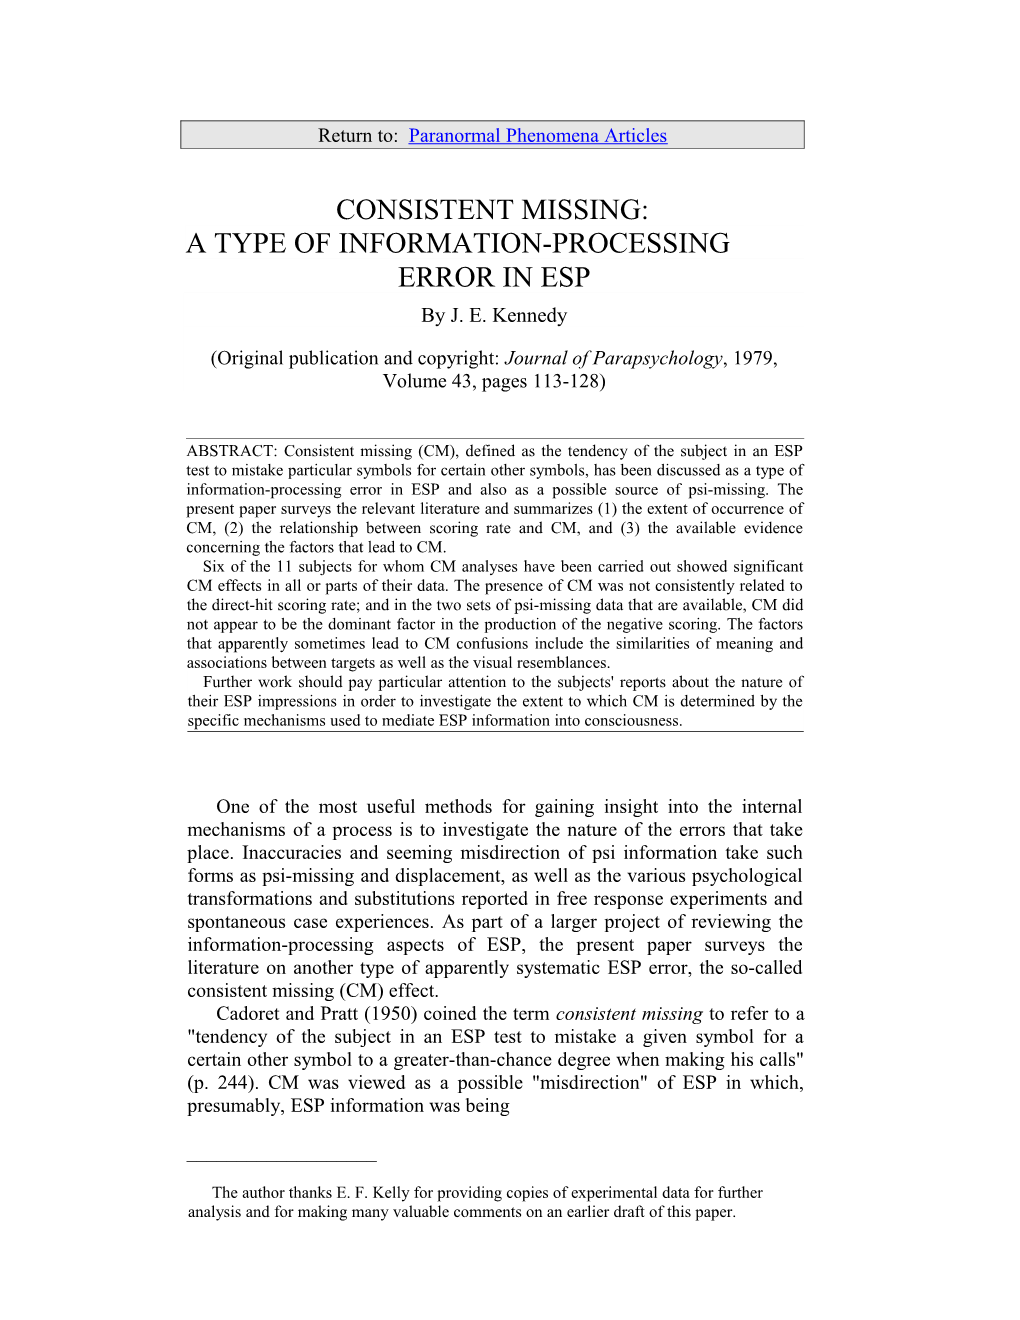 Consistent Missing: a Type of Information-Processing Error in ESP